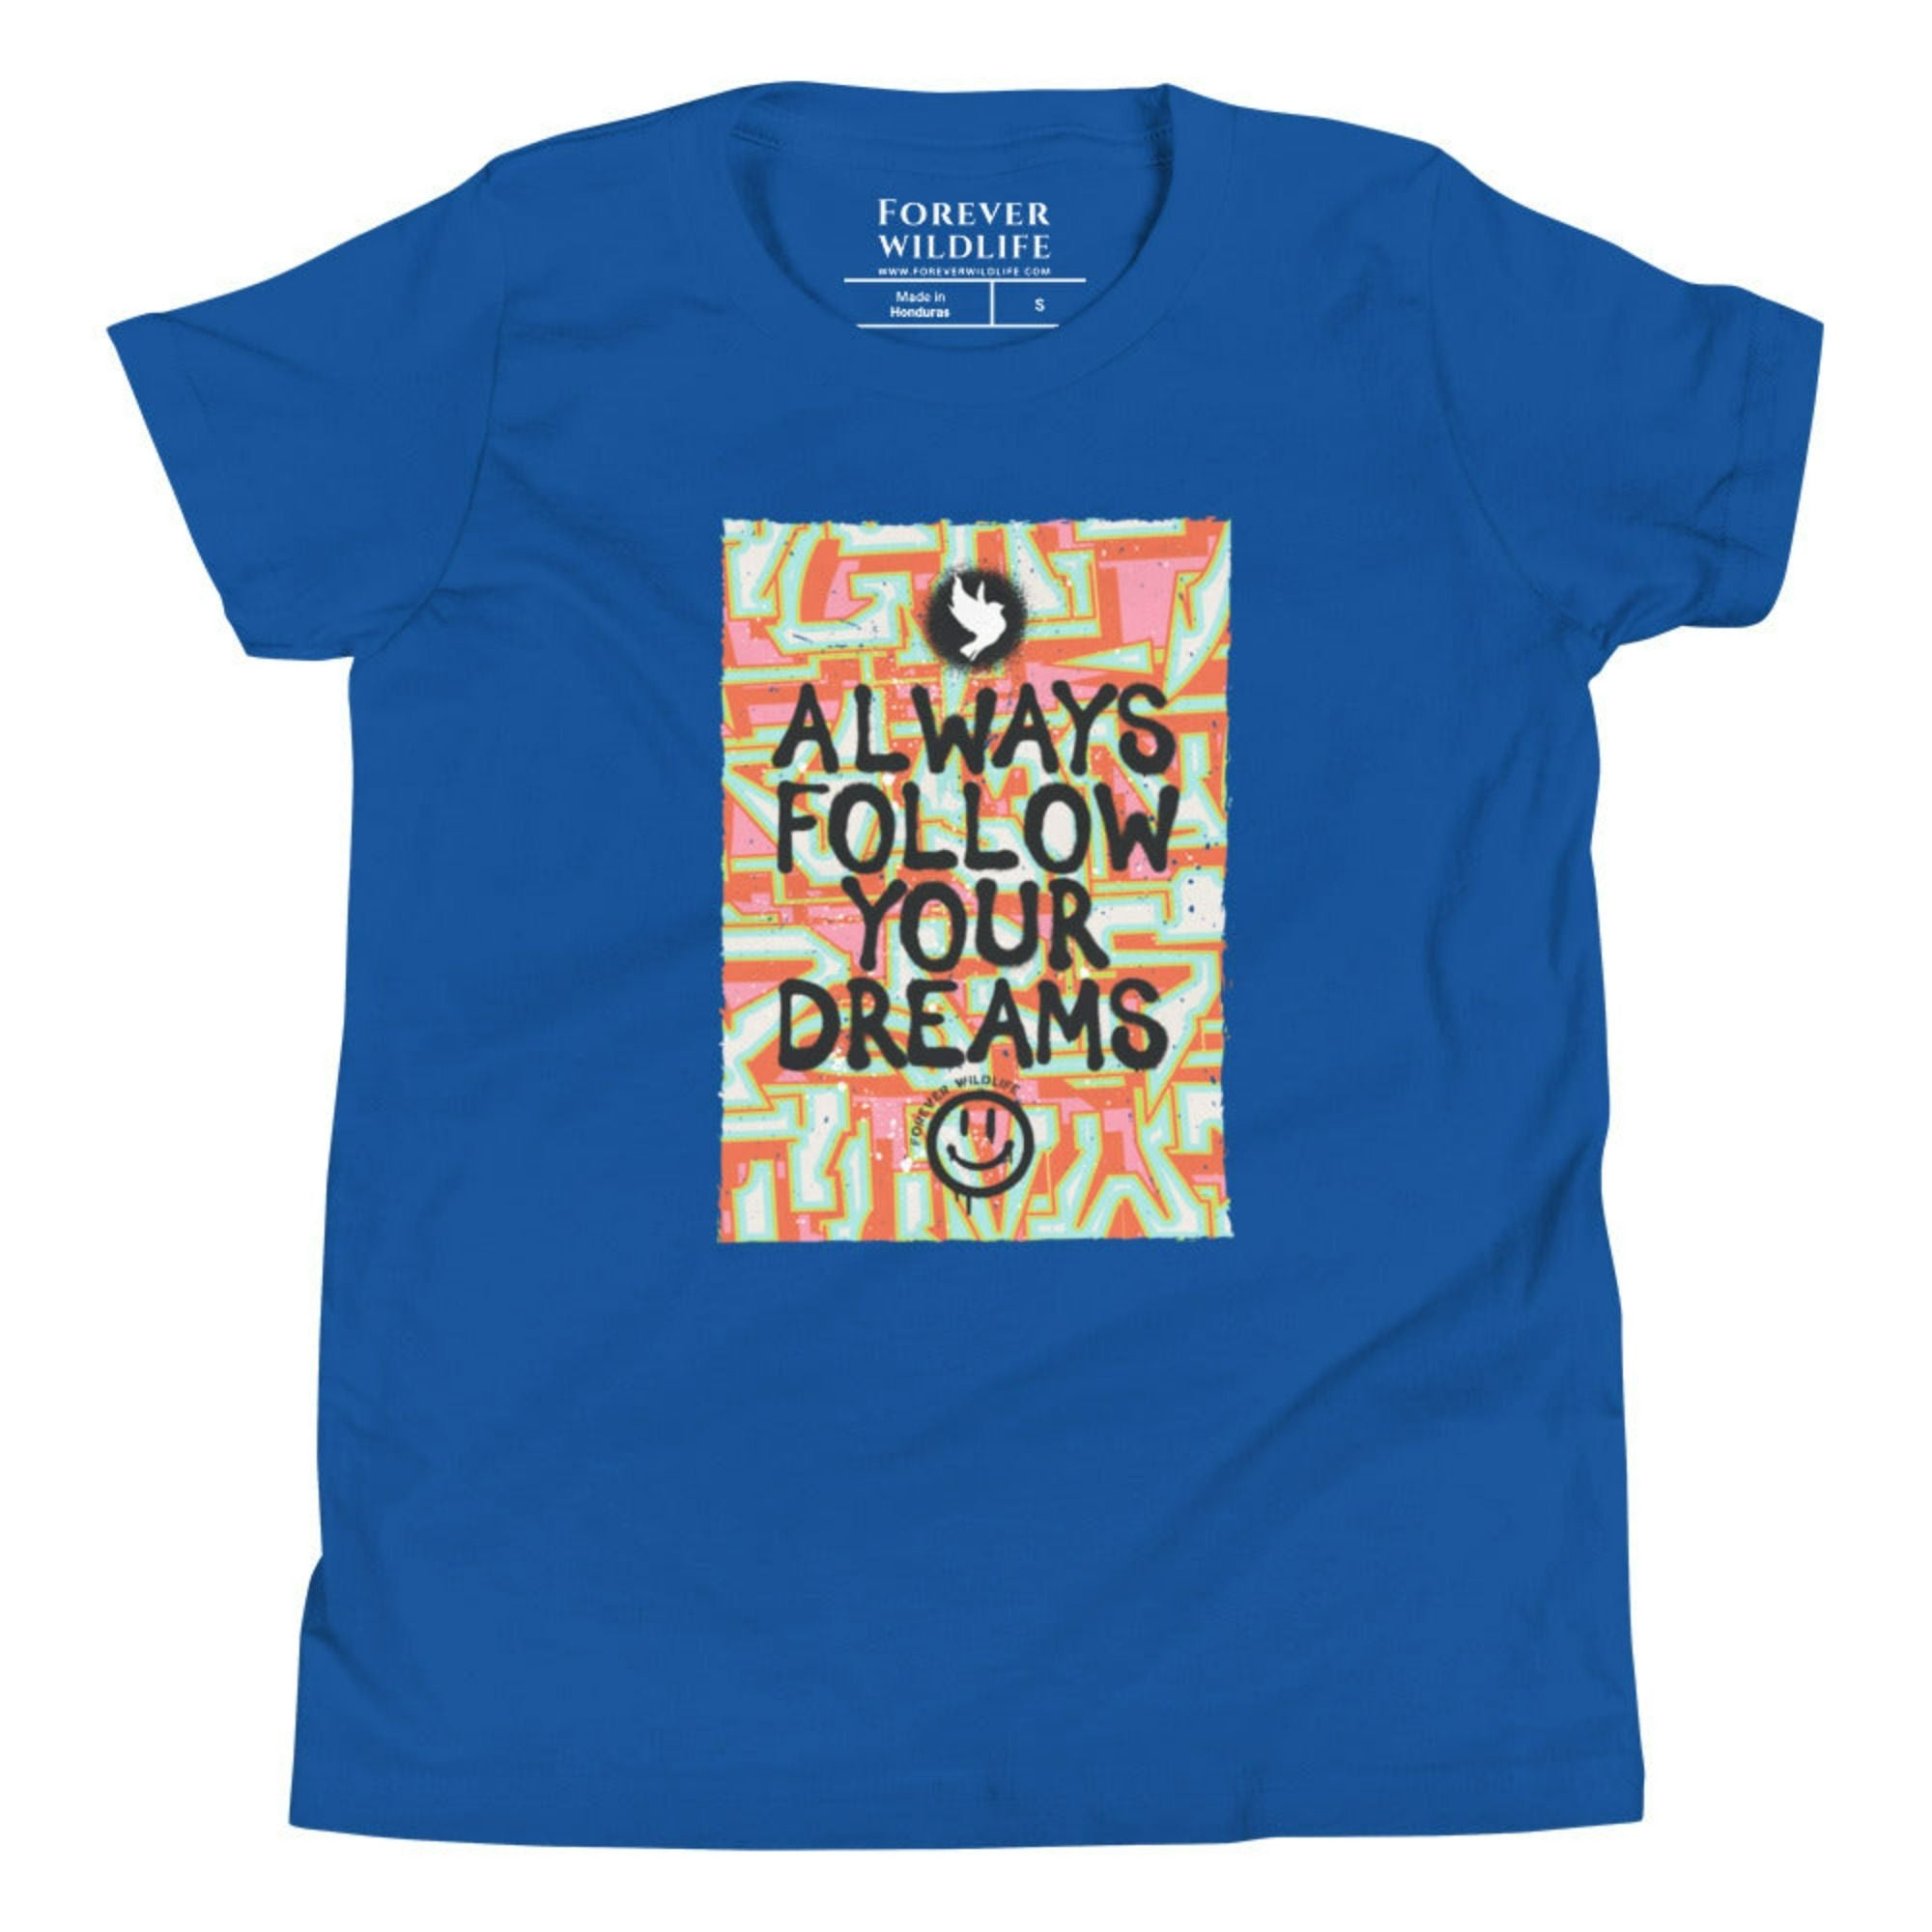 Blue Dove Youth T-Shirt with Dove graphic as part of Wildlife T Shirts, Wildlife Clothing & Apparel by Forever Wildlife